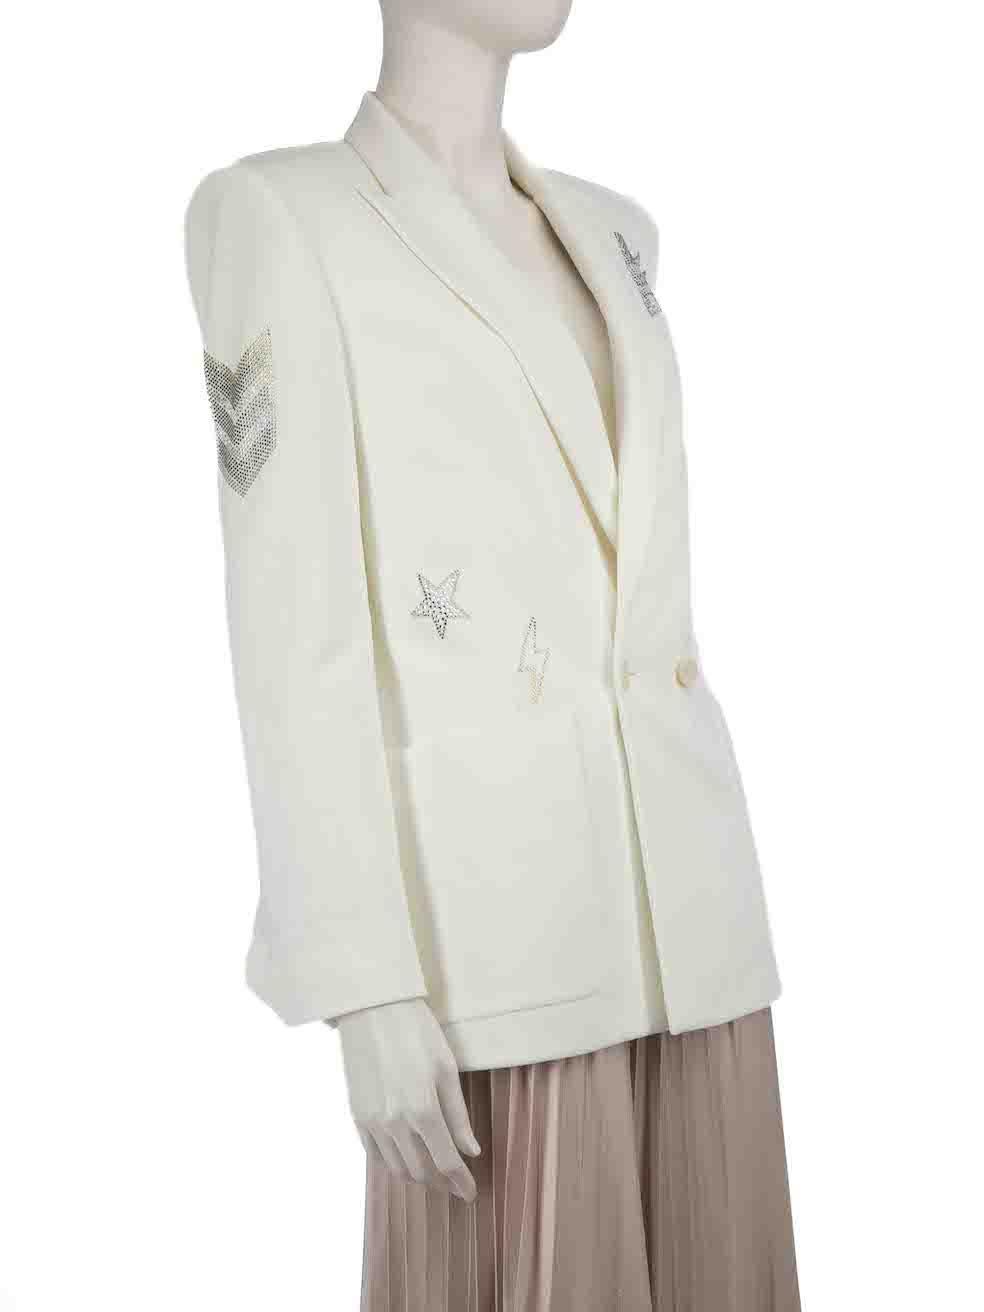 CONDITION is Very good. Hardly any visible wear to jacket is evident on this used Zadig & Voltaire designer resale item.
 
 
 
 Details
 
 
 White
 
 Polyester
 
 Blazer
 
 Shoulder padded
 
 Crystal embellished detail
 
 Double breasted
 
 Button